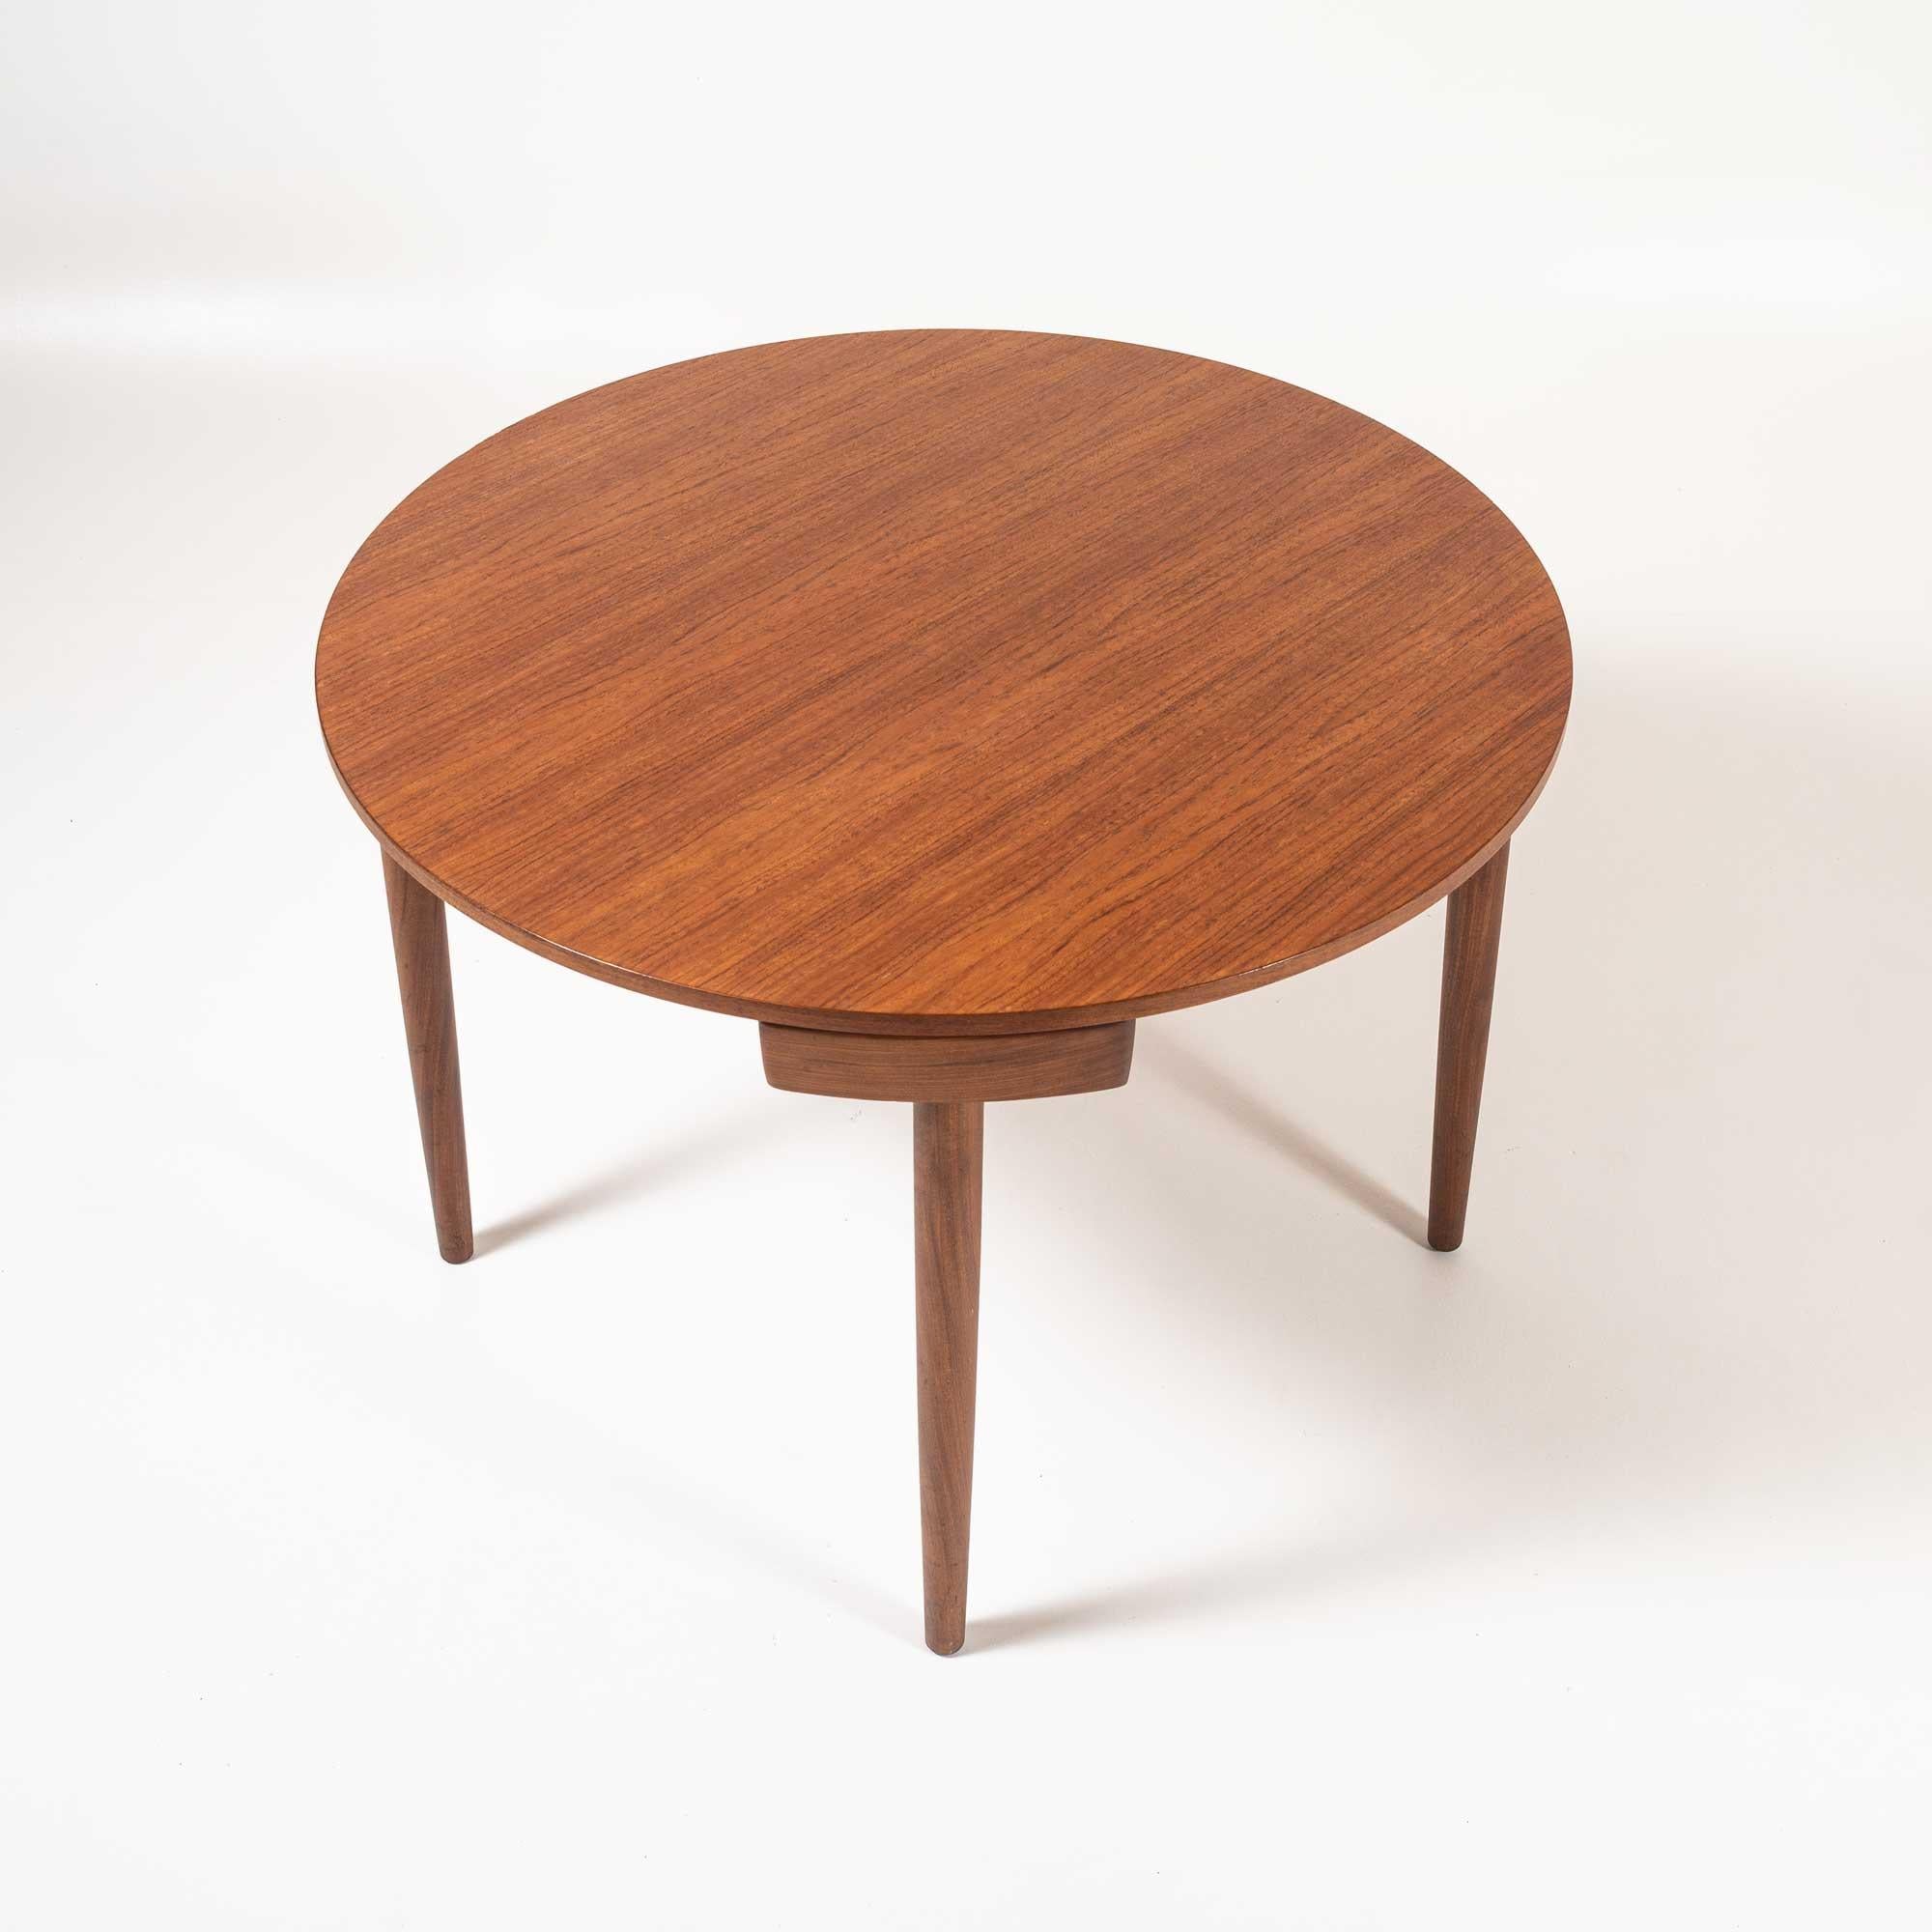 hans olsen table and chairs